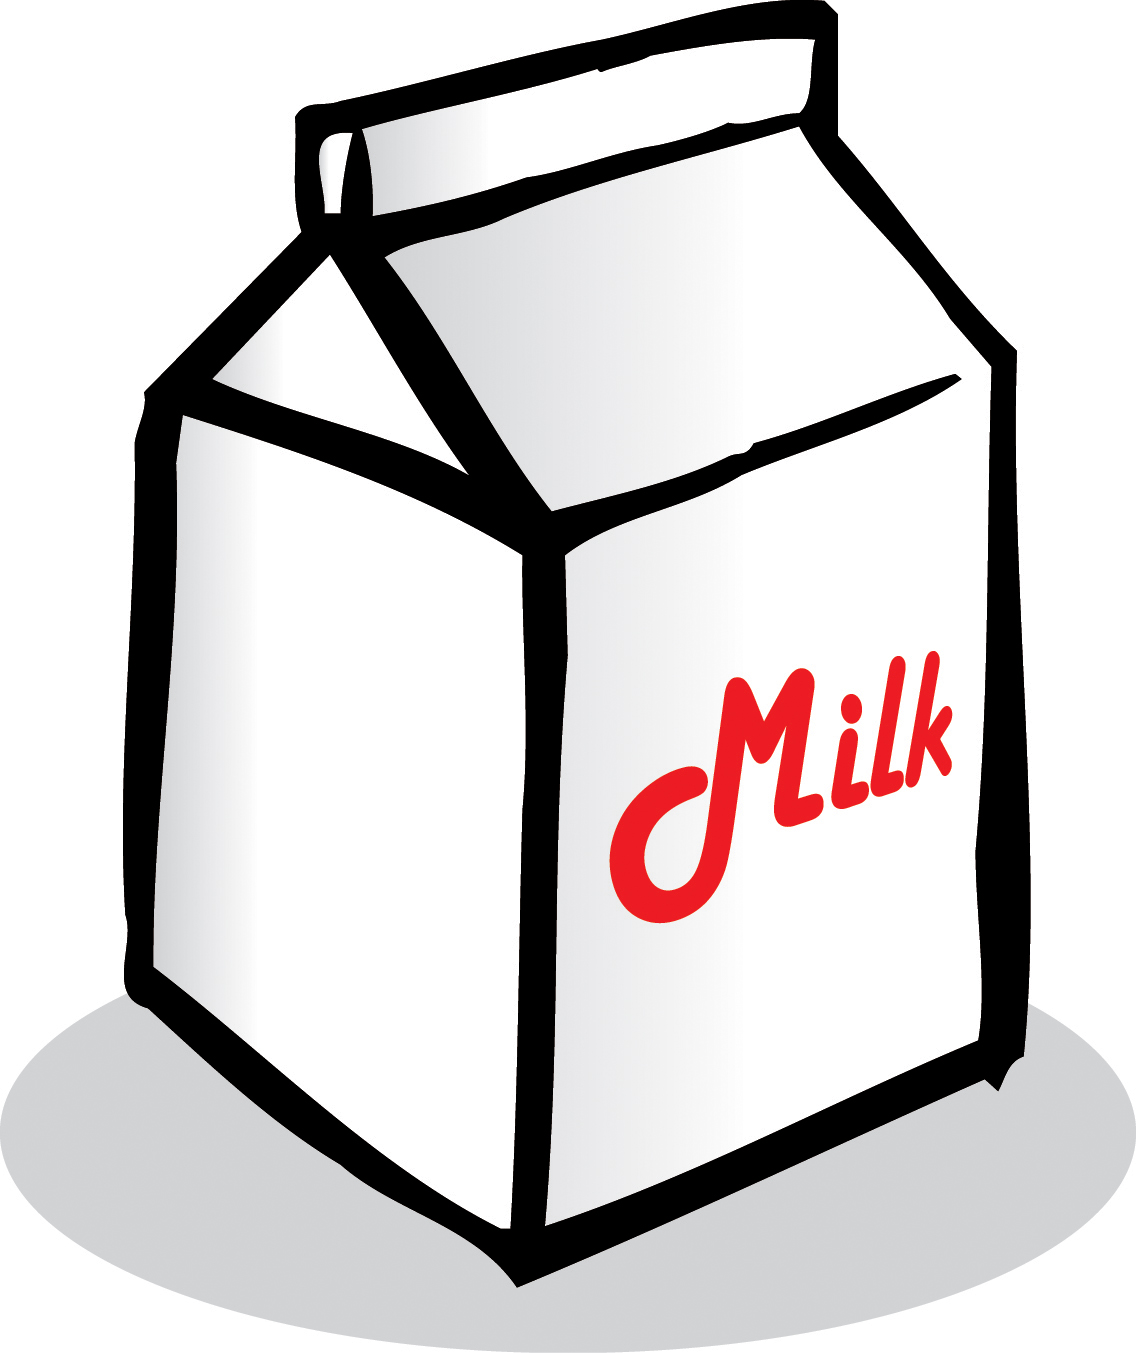 Small Container Of Milk Clipart